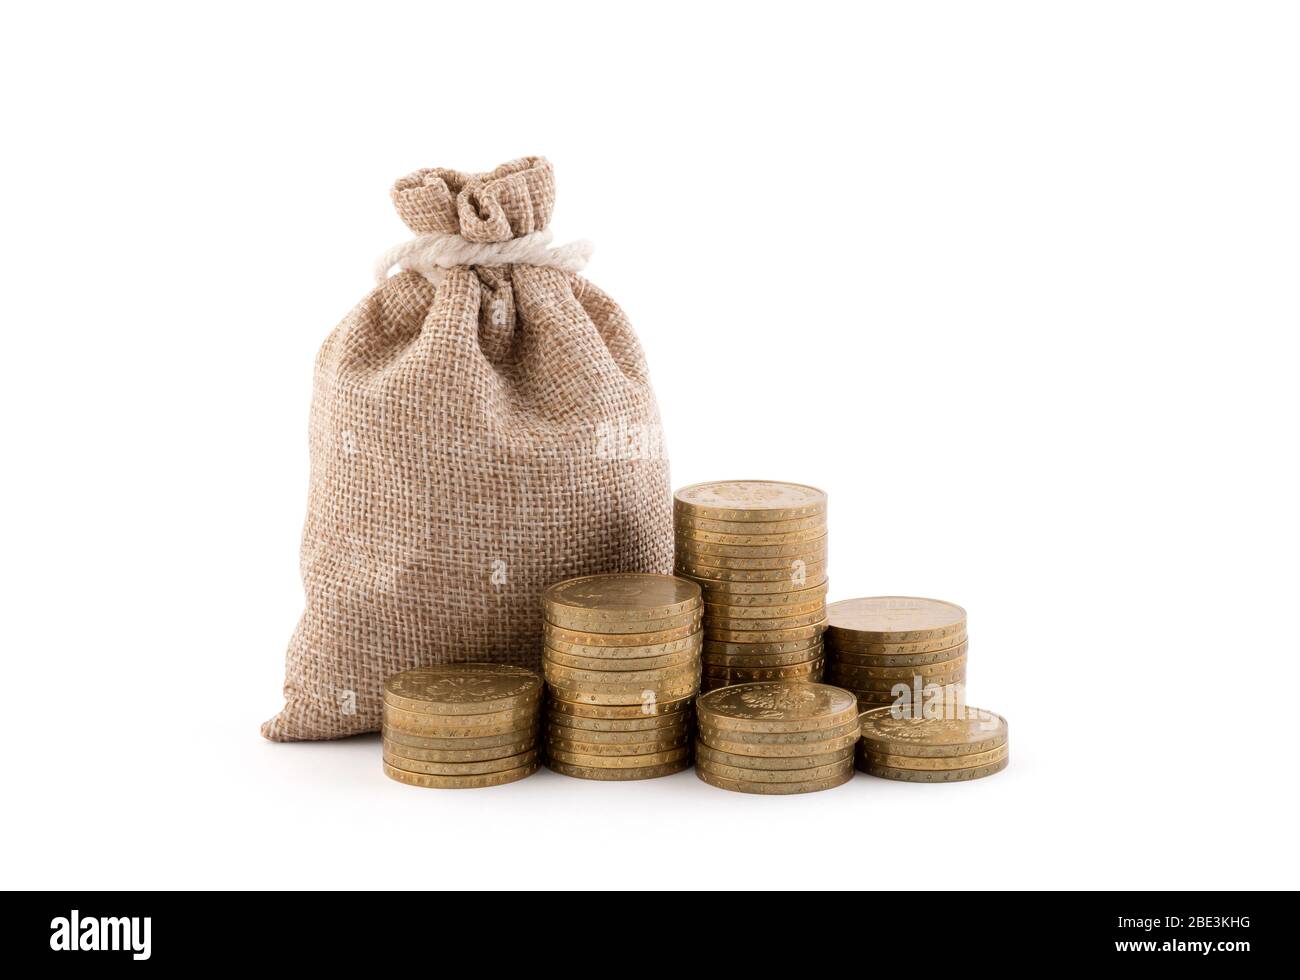 Money In The Bag Stock Photo, Picture and Royalty Free Image. Image  17161727.